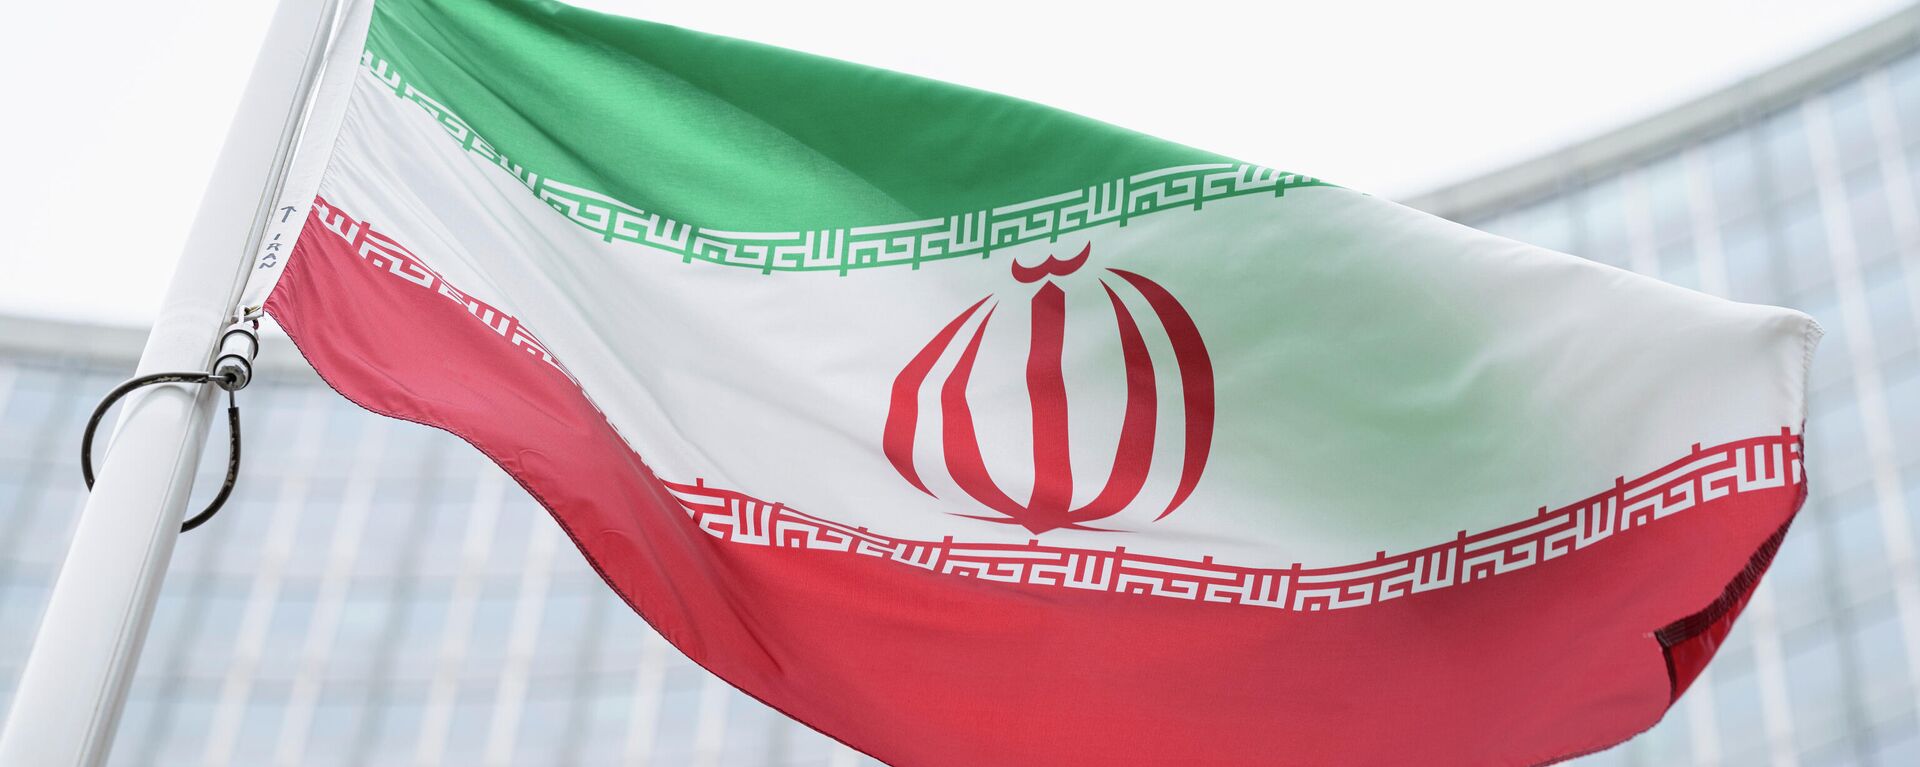 FILE - The flag of Iran waves in front of the the International Center building with the headquarters of the International Atomic Energy Agency, IAEA, in Vienna, AustriaI, May 24, 2021. On Monday, Nov. 29, 2021, negotiators are gathering in Vienna to resume efforts to revive Iran's 2015 nuclear deal with world powers, with hopes of quick progress muted after the arrival of a hard-line new government in Tehran led to a more than five-month hiatus. (AP Photo/Florian Schroetter, FILE) - Sputnik International, 1920, 15.10.2023